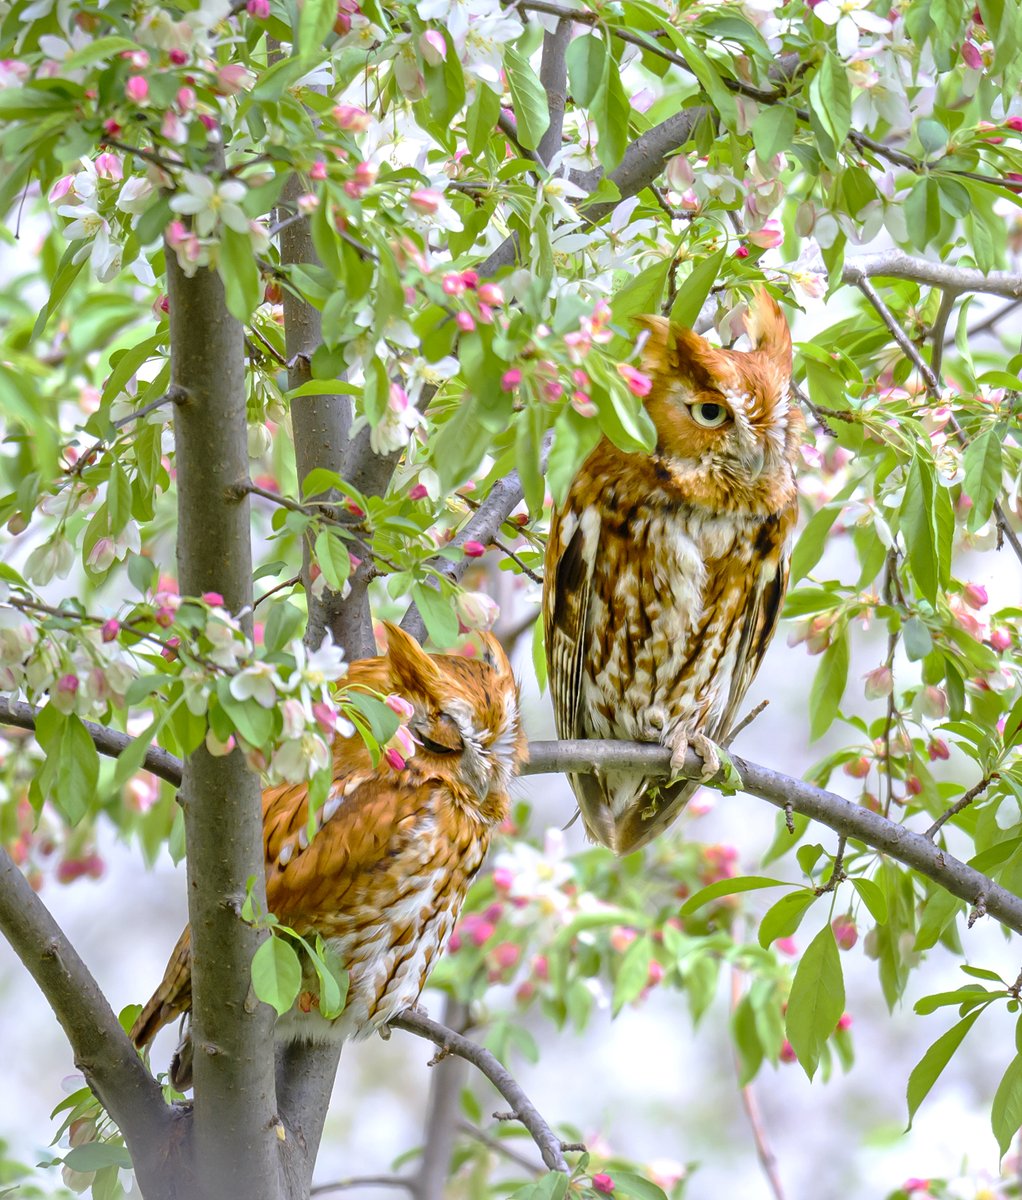 Eastern Screech Owls resting in a flowering crabapple tree. They picked a lovely place to perch. 🌸🦉